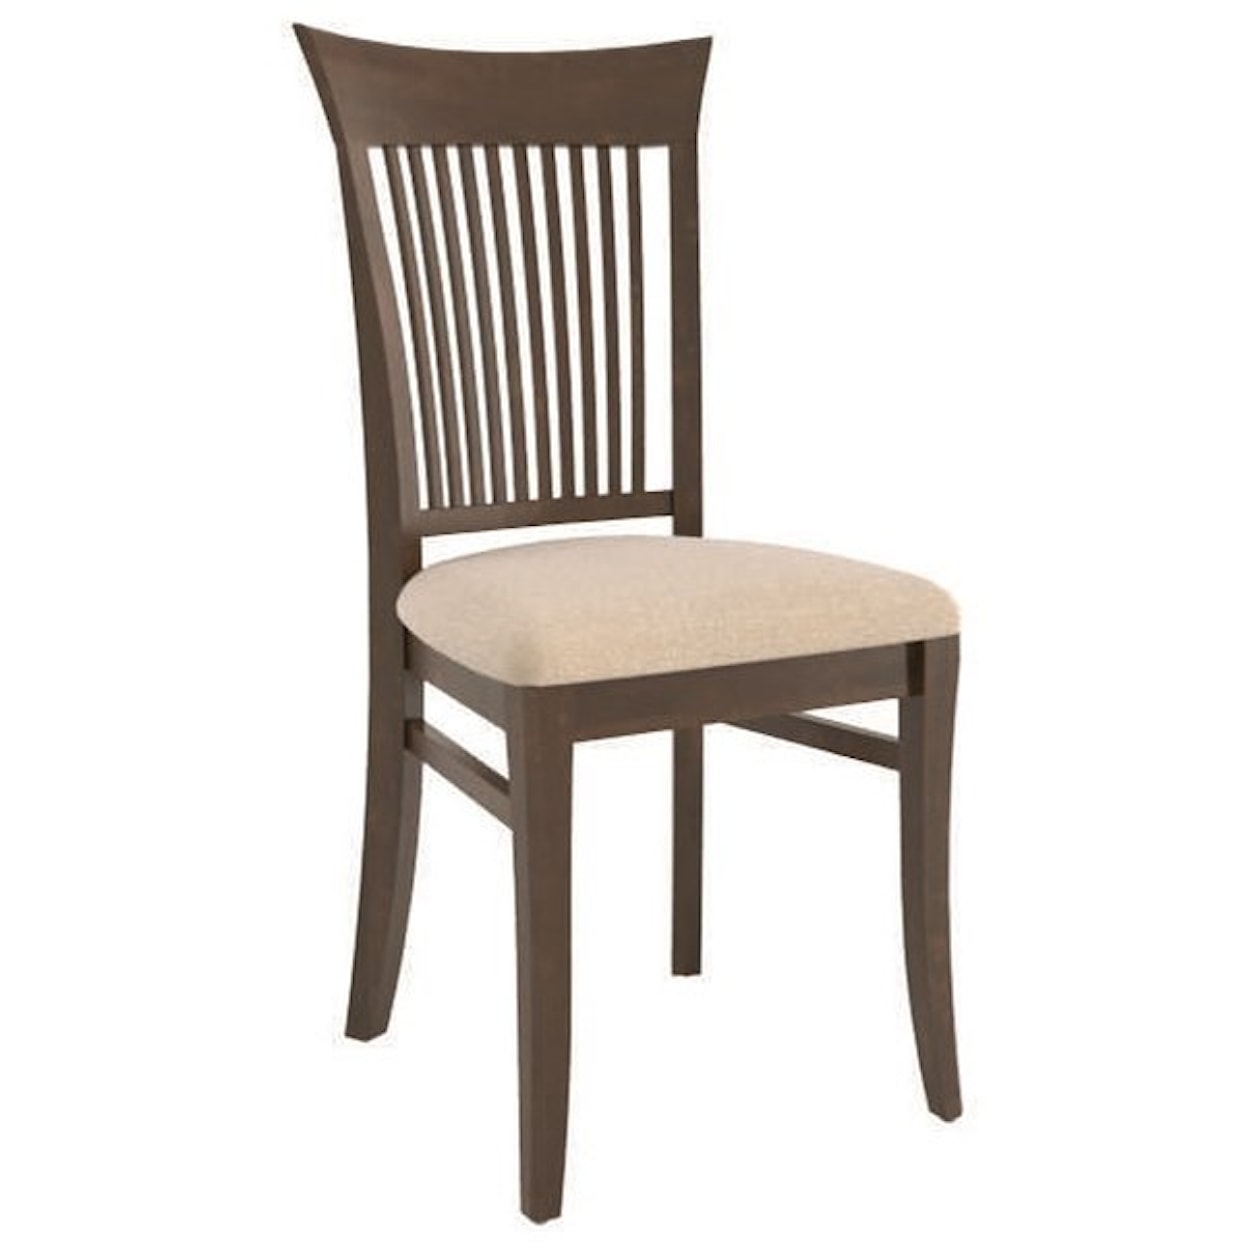 Canadel Core - Custom Dining Customizable Upholstered Dining Side Chair